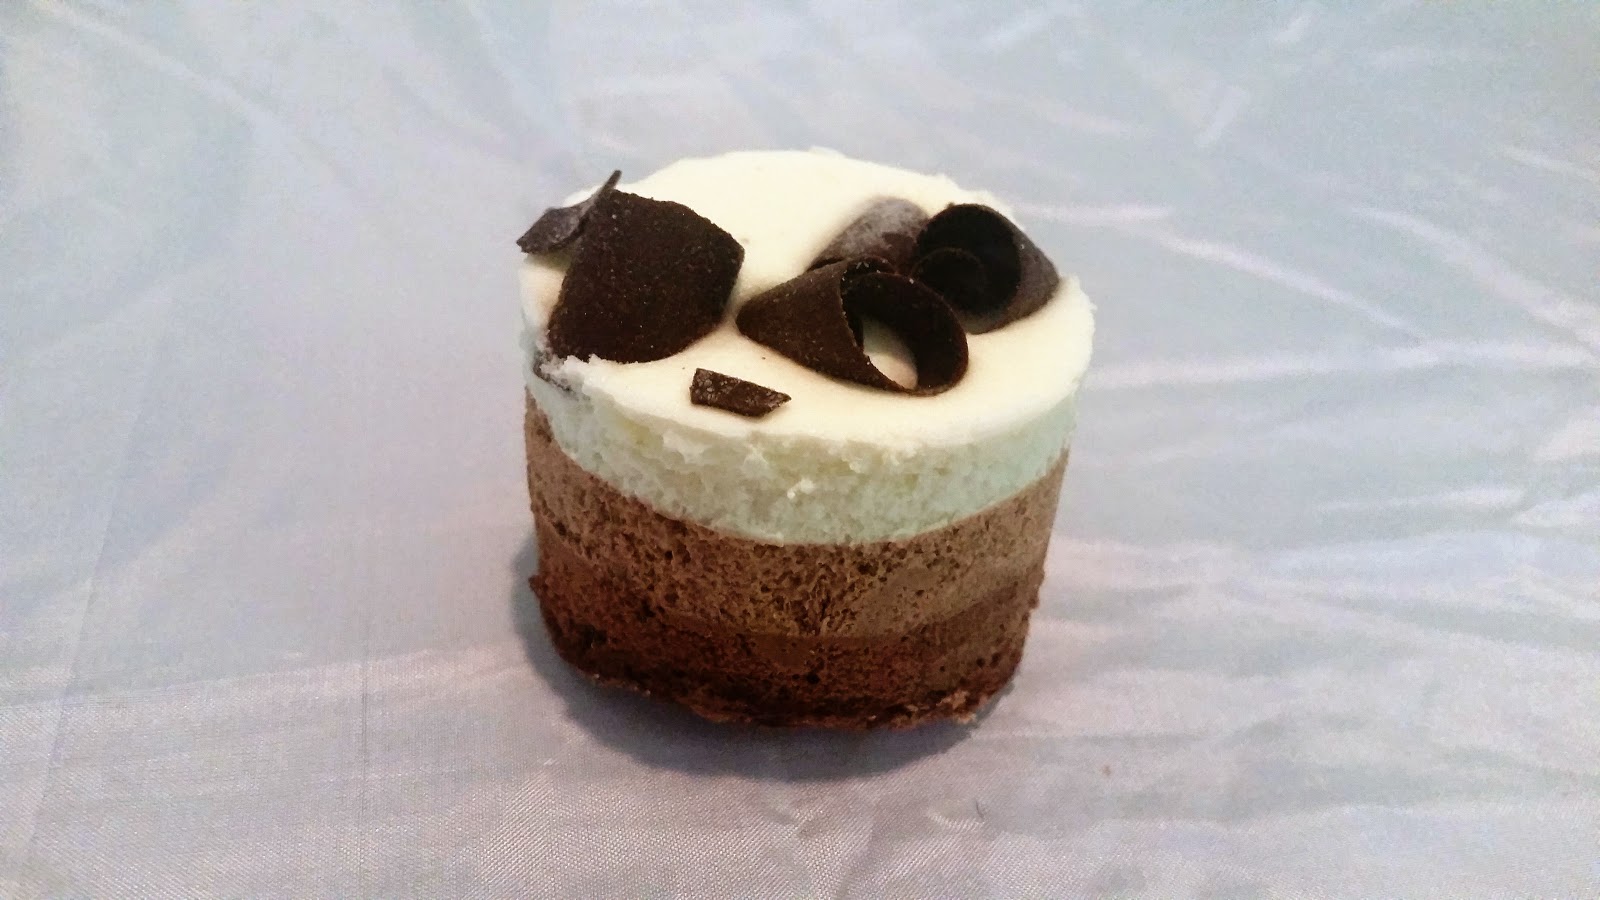 LOOKA Patisserie French Desserts Review and Giveaway Ends 7/14- #chocolatemousse via ProductReviewMom.com